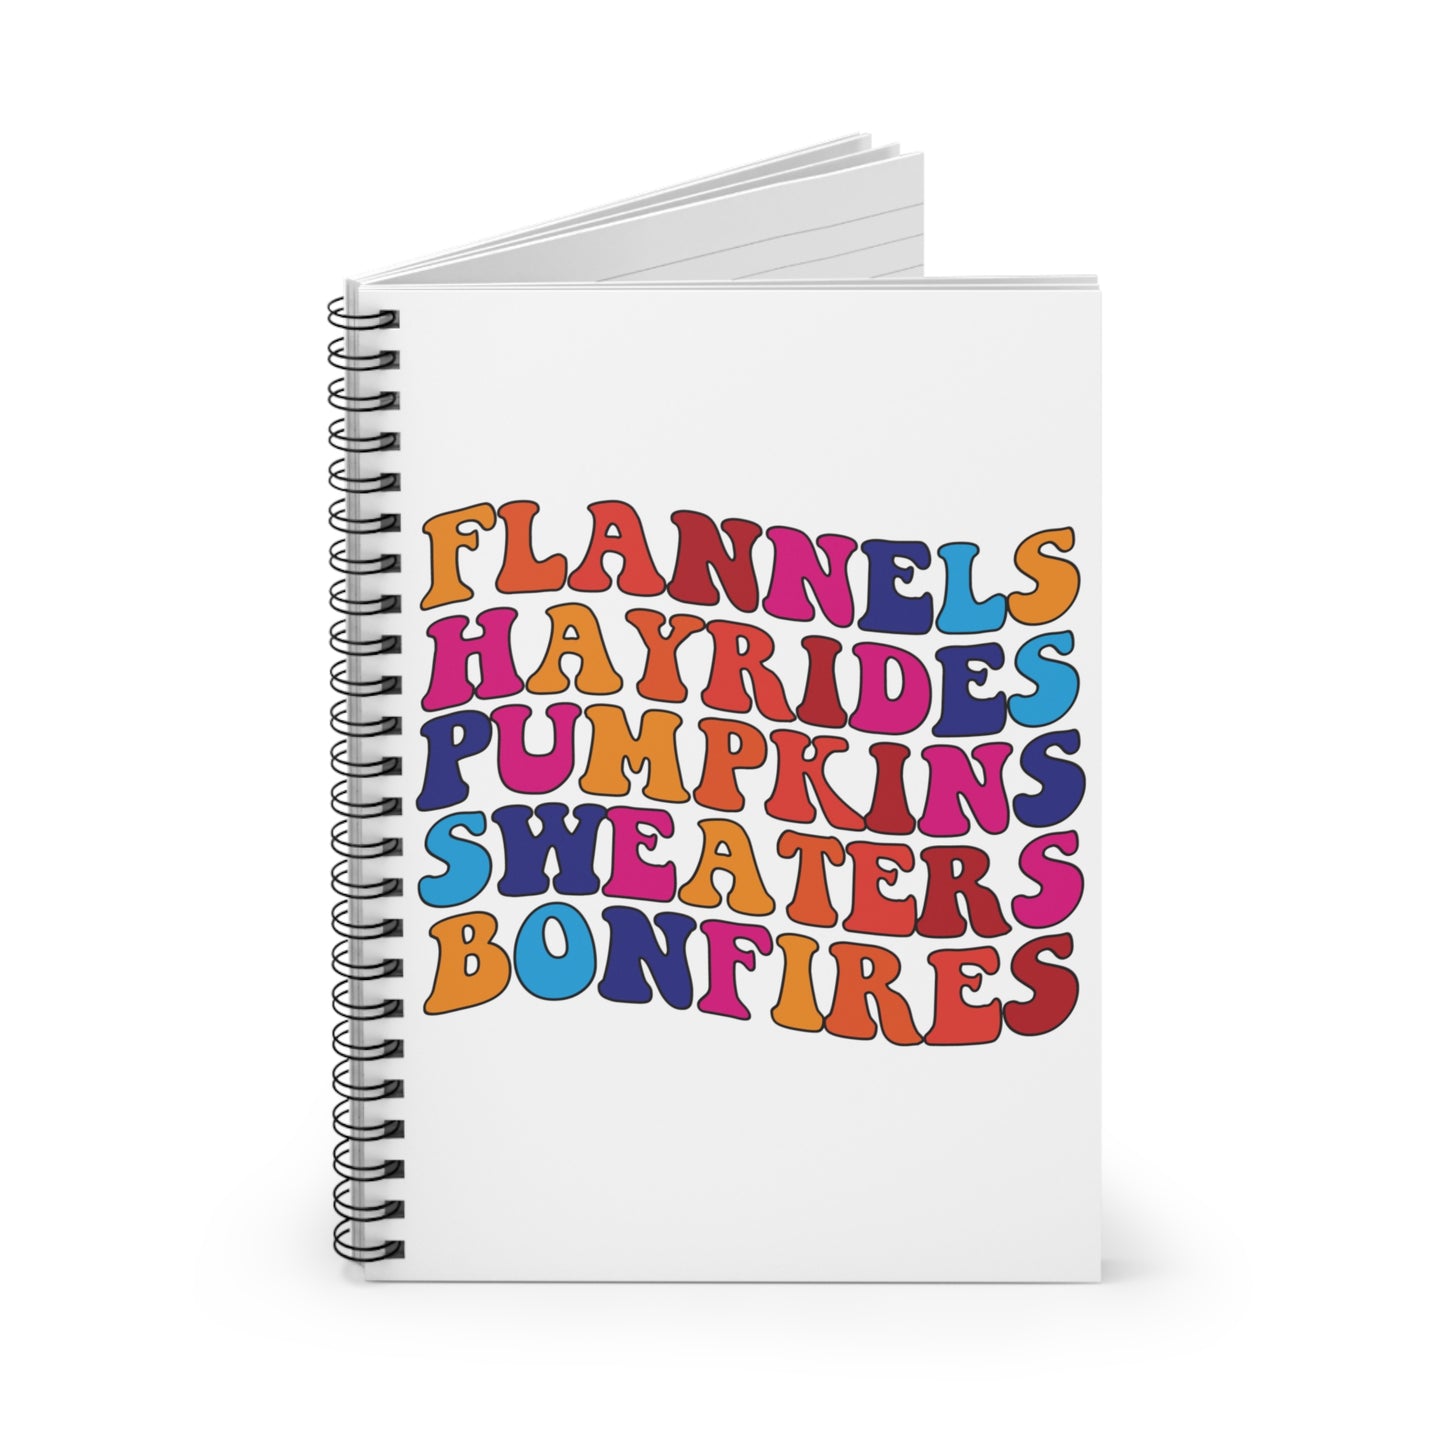 Flannels & Hayrides: Spiral Notebook - Log Books - Journals - Diaries - and More Custom Printed by TheGlassyLass